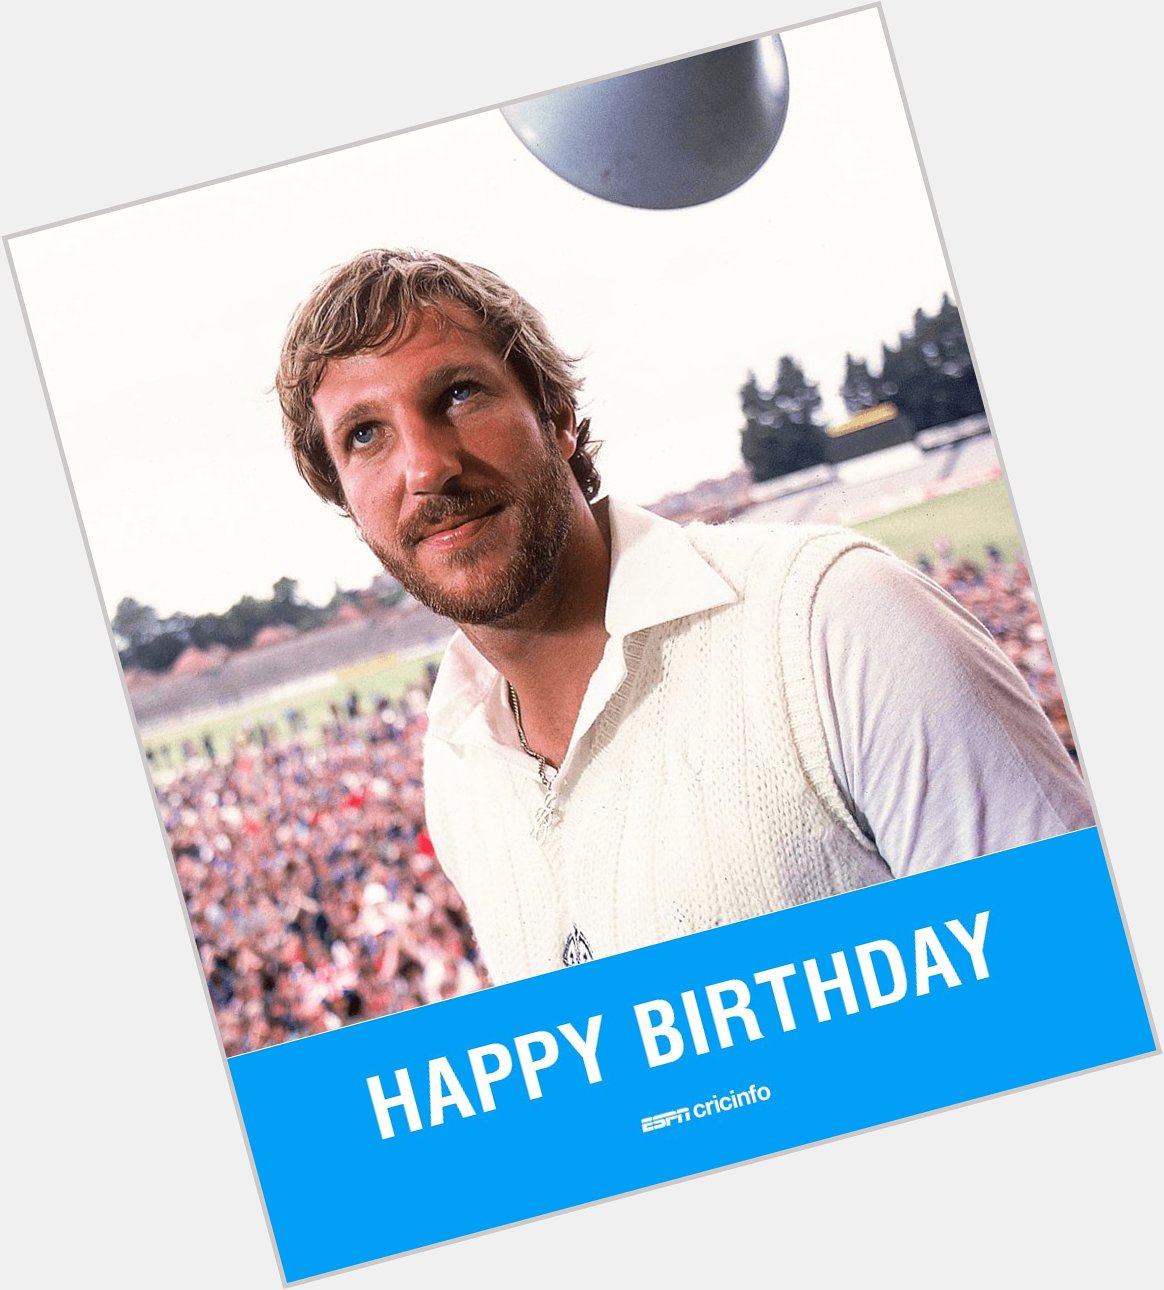   Happy birthday to Ian Botham, one of the game\s finest allrounders 

 